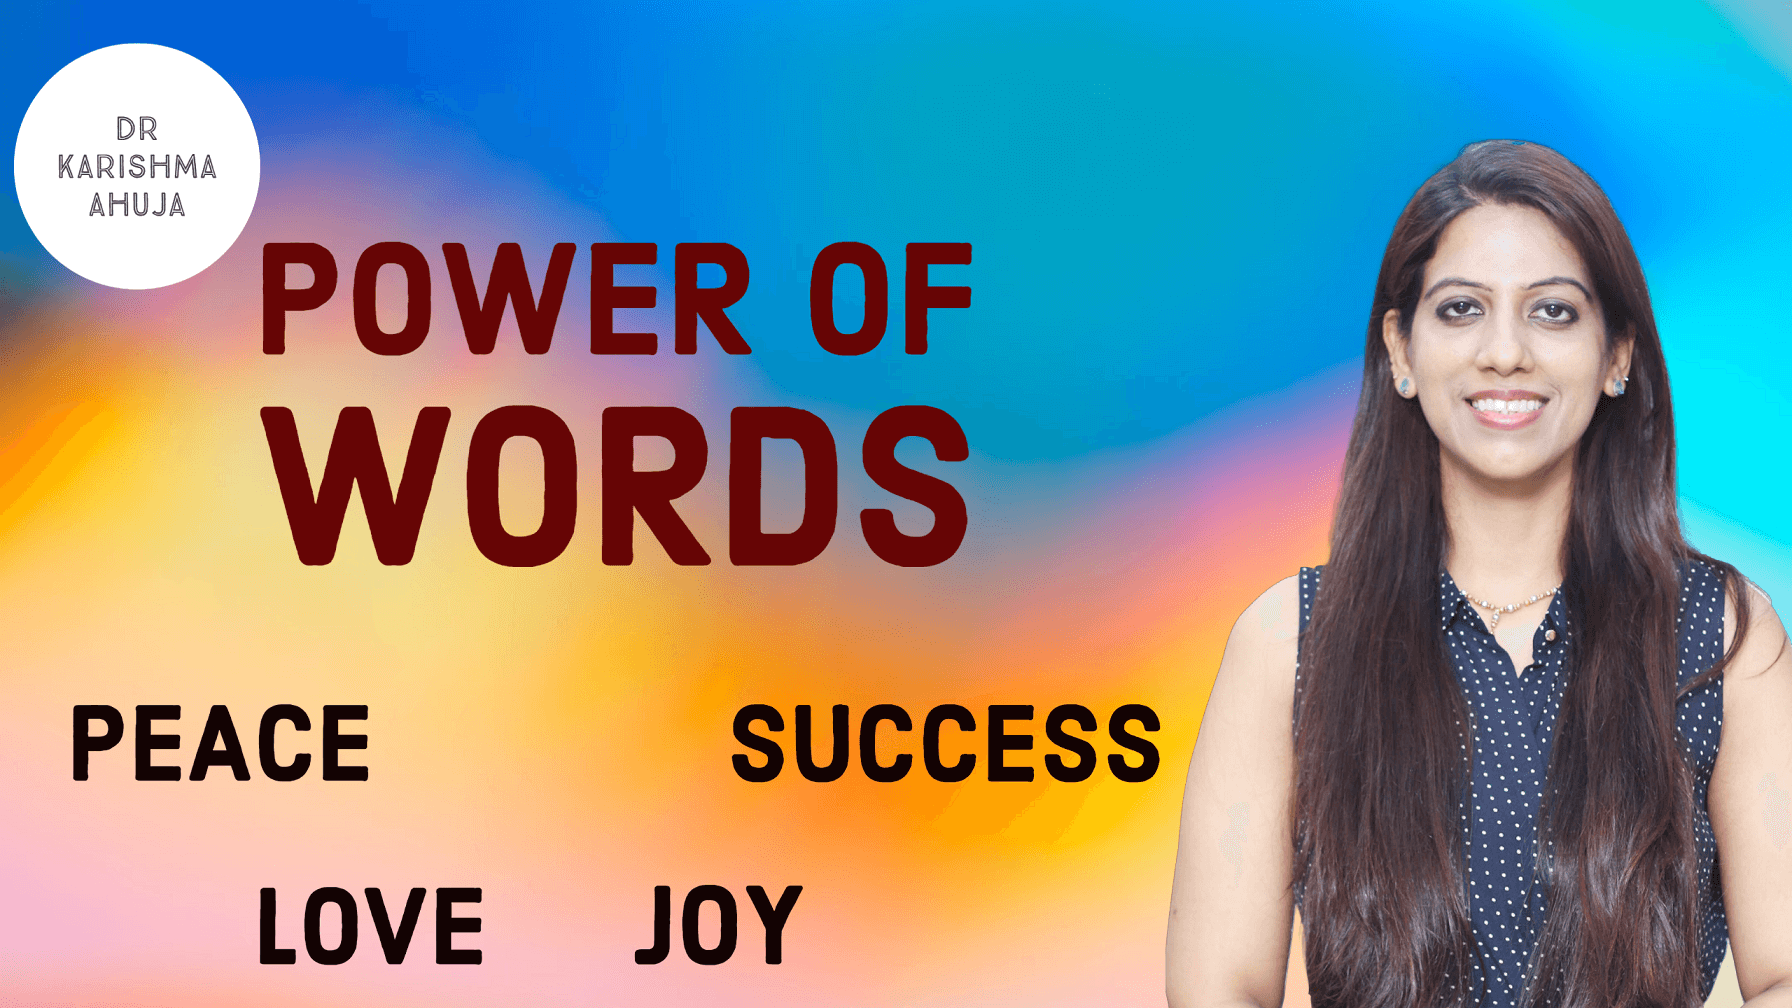 The Power of Words and How they can change your Life